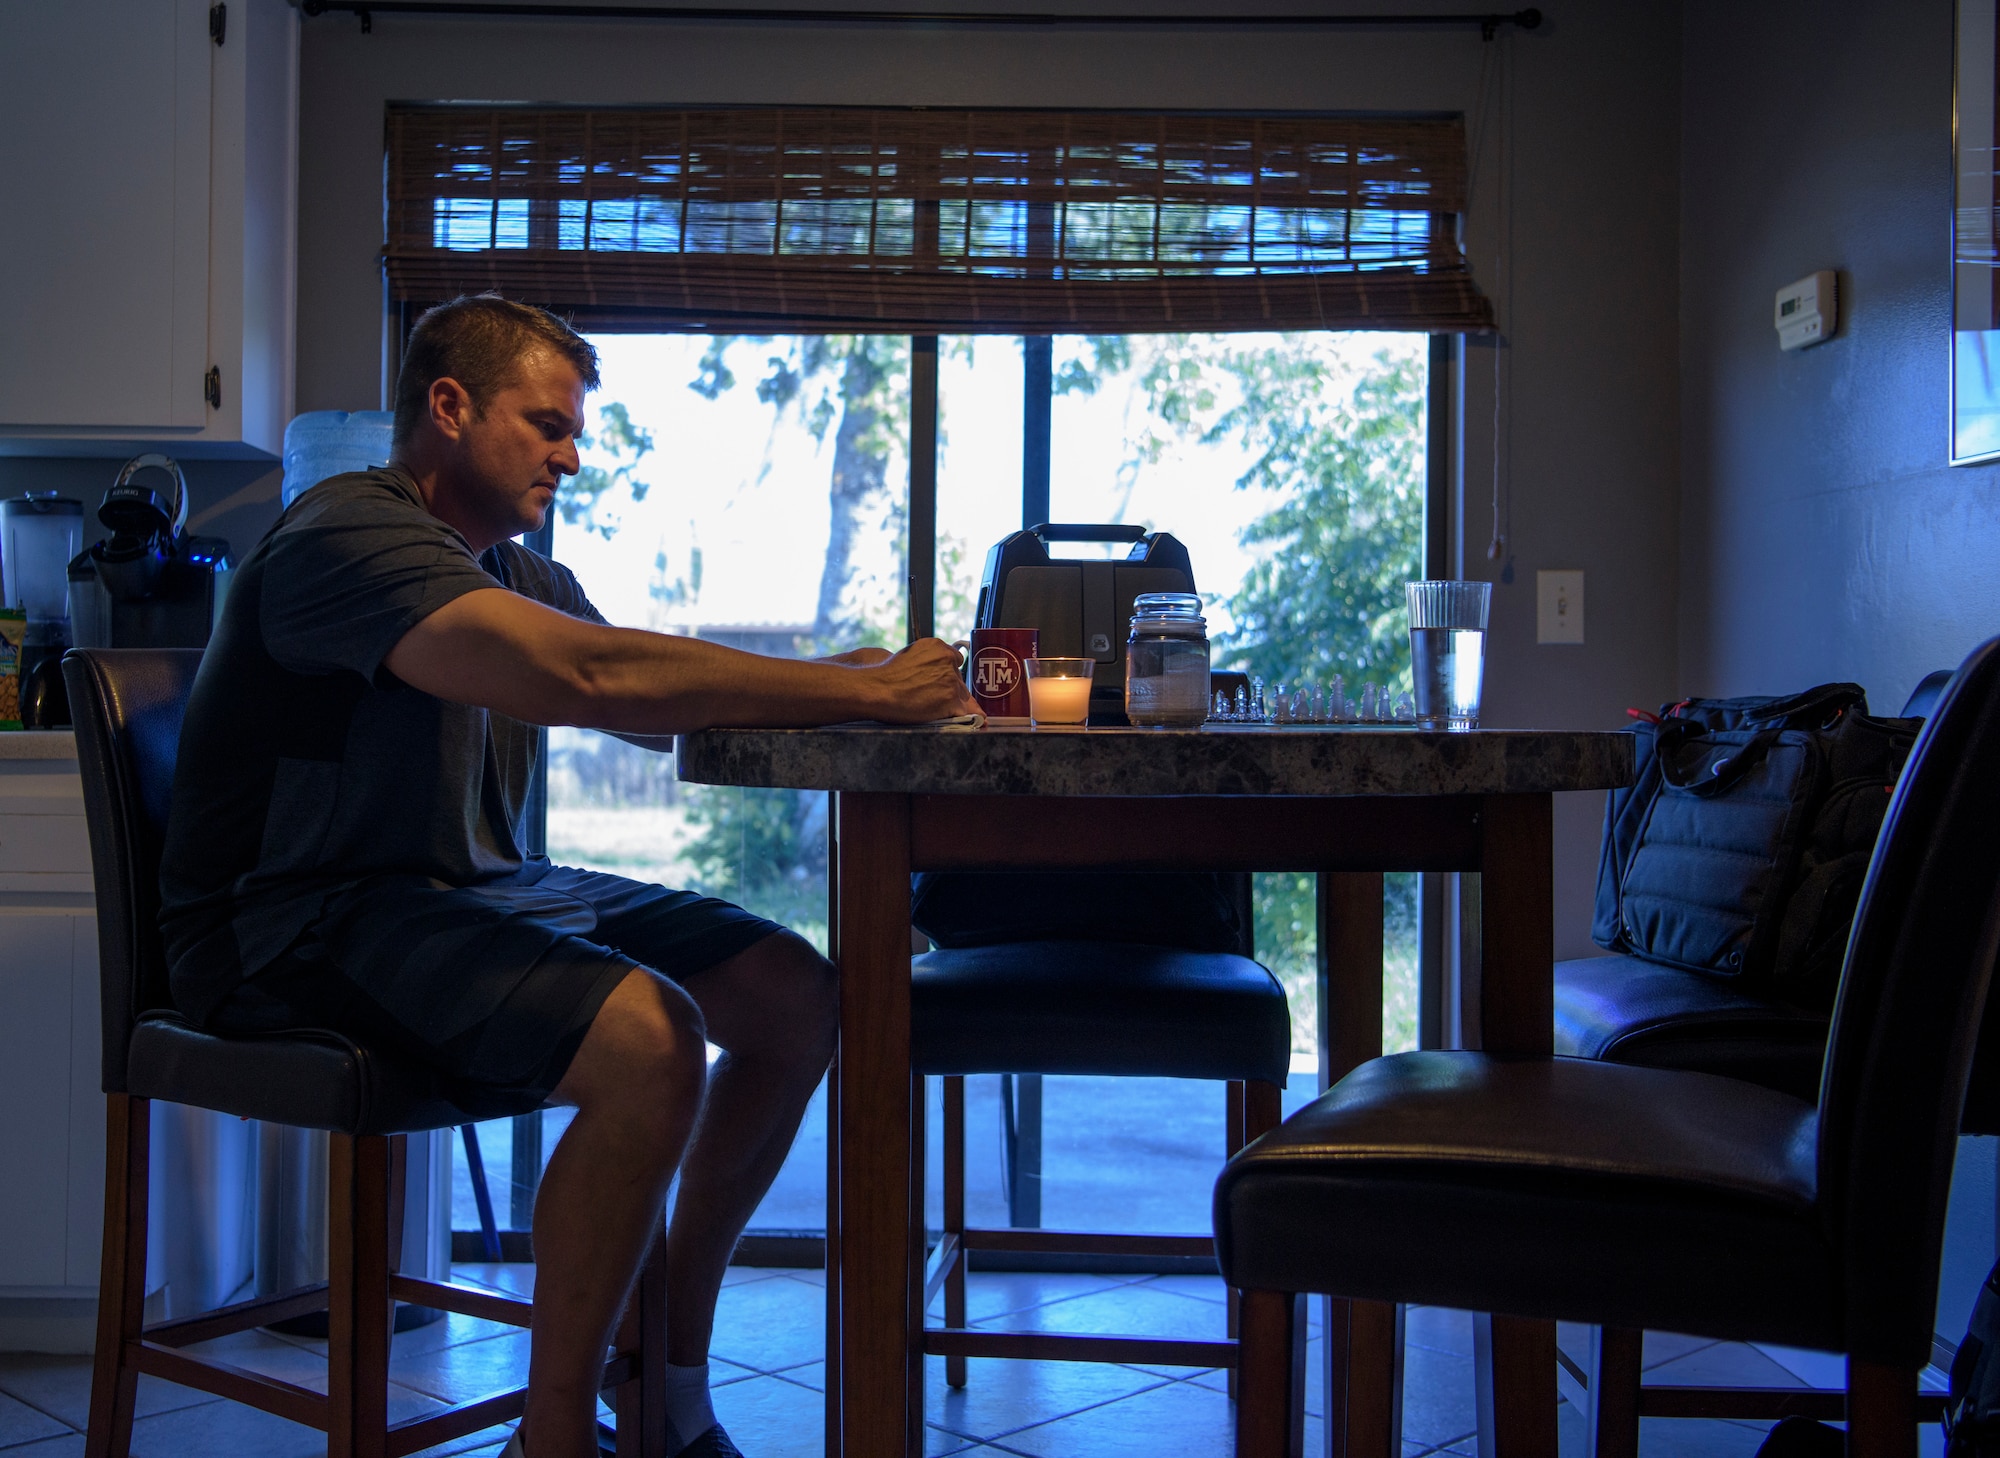 Officer Tim Bull, a Combat Arms Training and Maintenance instructor, sketches a drawing at his kitchen table after work, April 24, 2018, in Palm Bay, Fla. His wife passed away from cancer, 7 years ago. (U.S. Air Force photo by Airman 1st Class Dalton Williams)